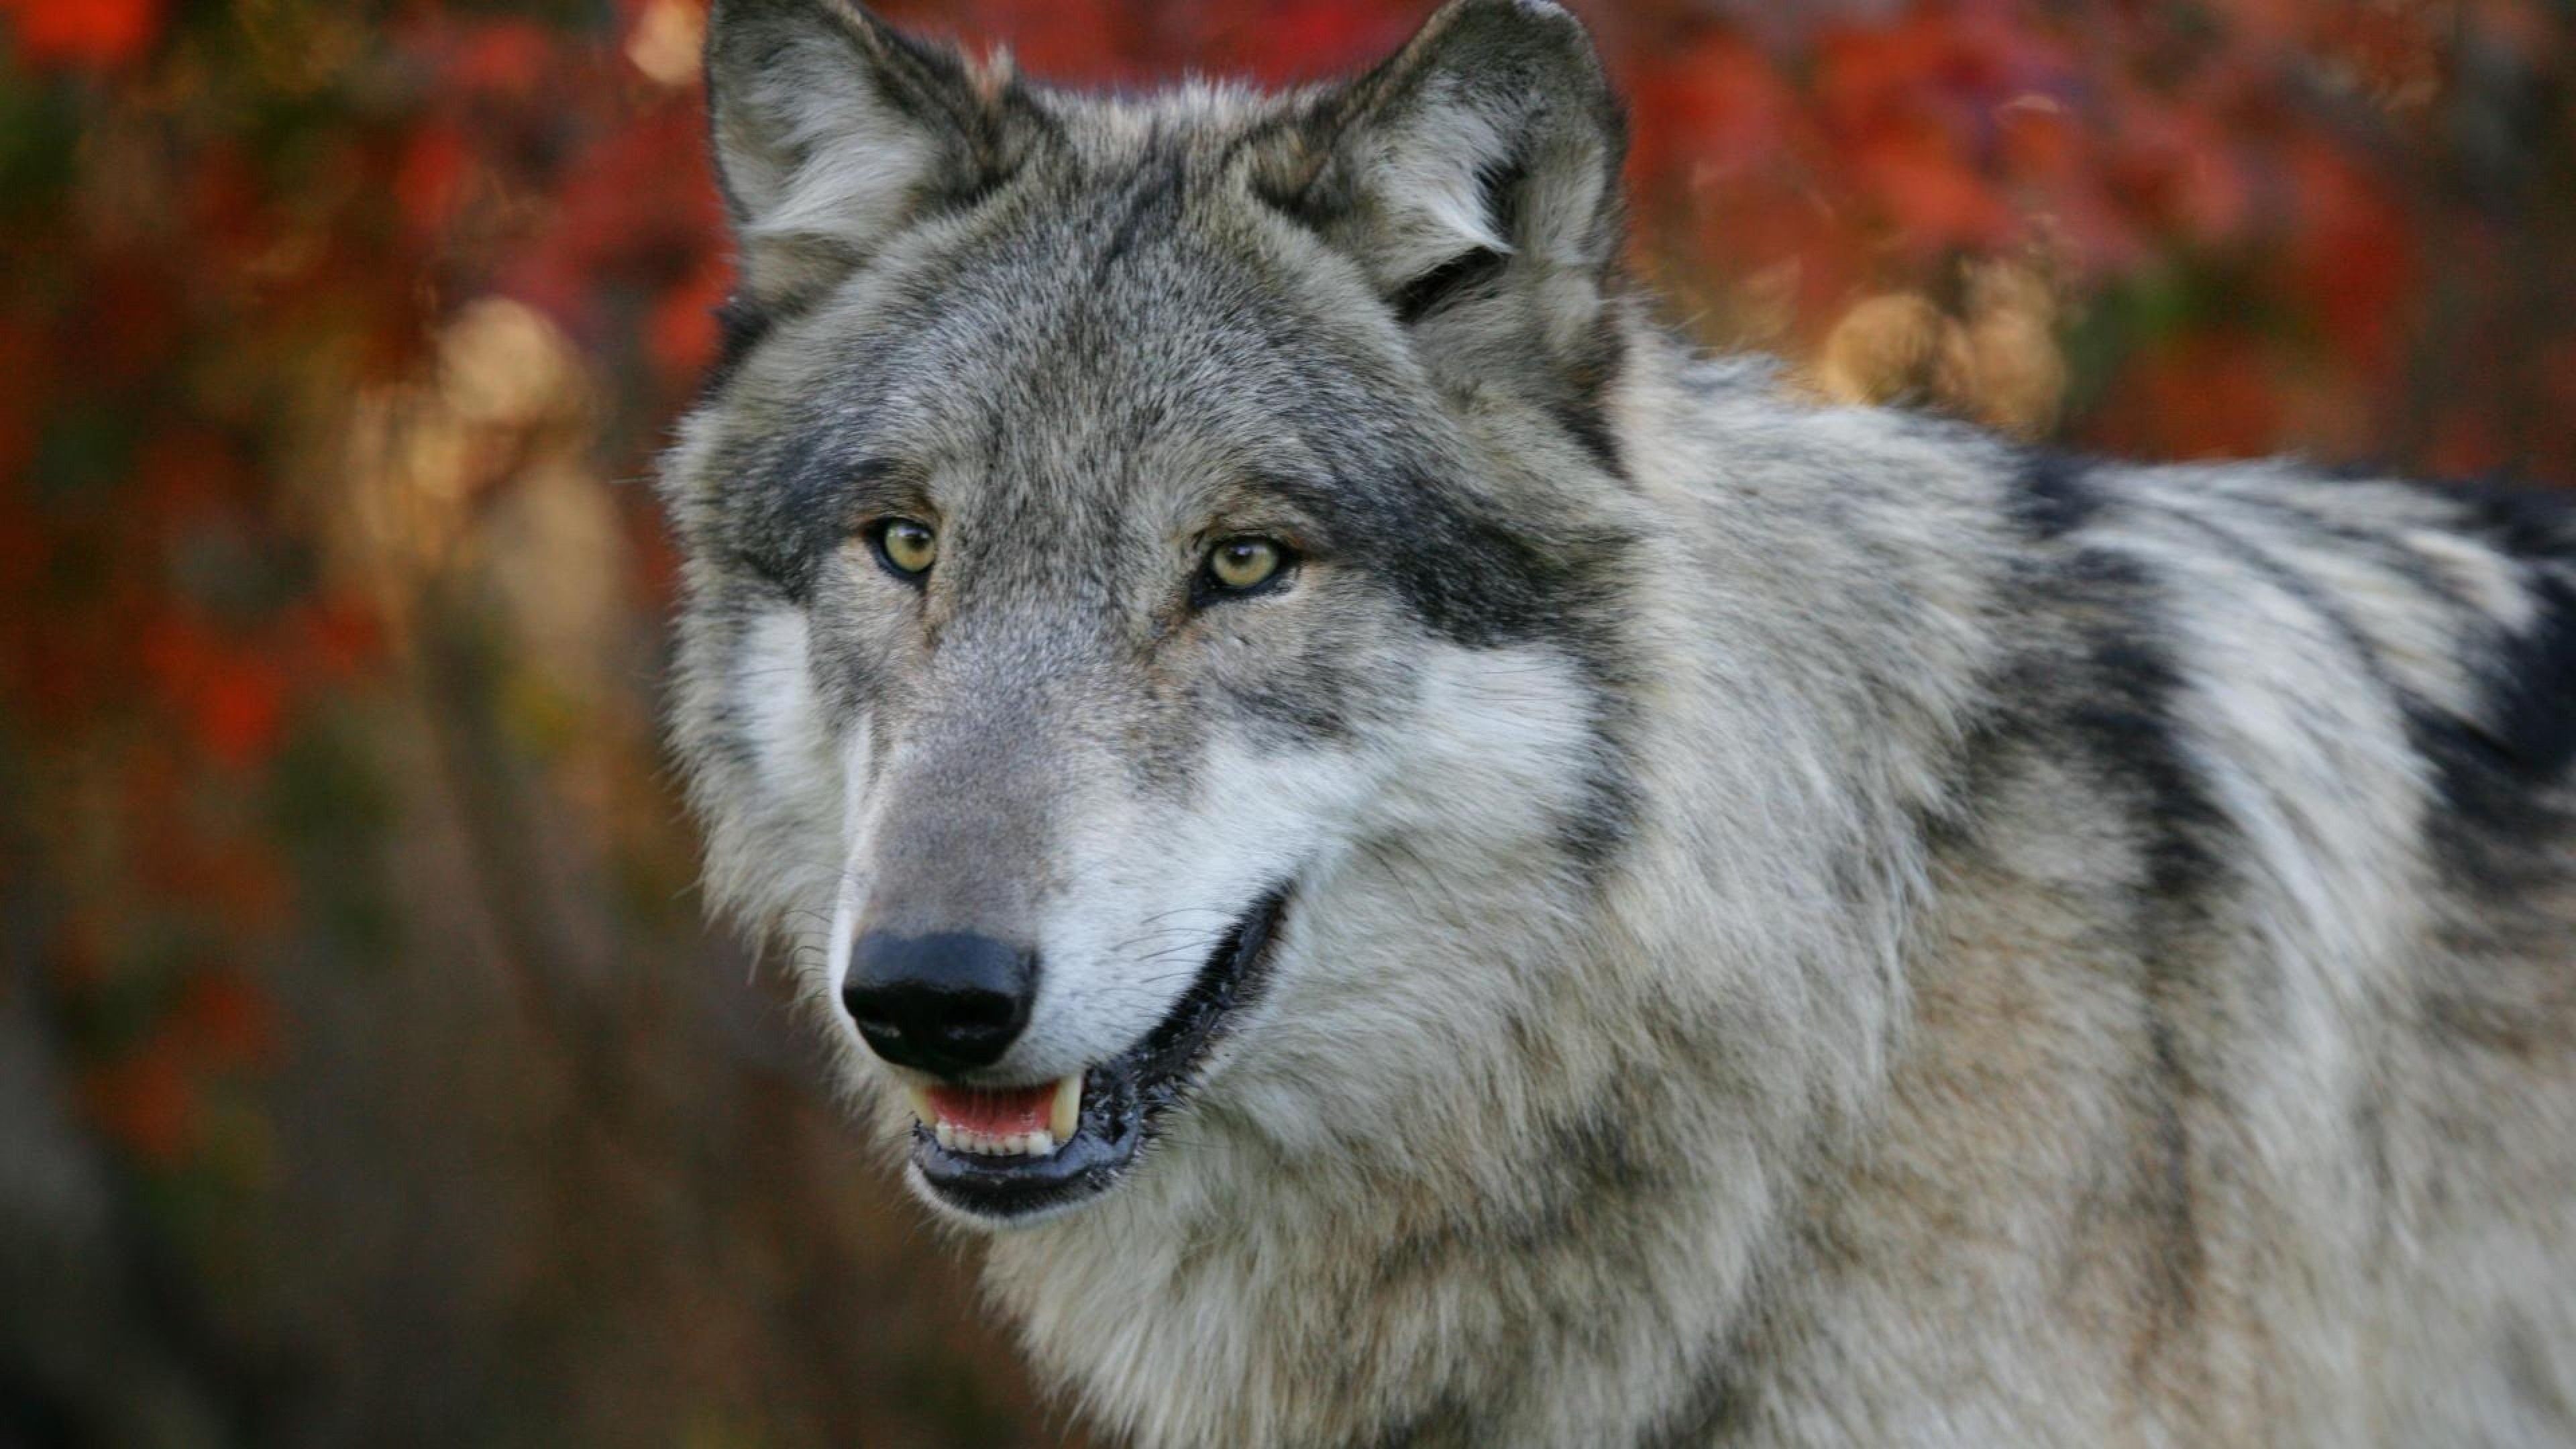 Gray Wolf: The genus Canis, Specialized for cooperative game hunting, Large canine teeth, Powerful jaws. 3840x2160 4K Wallpaper.